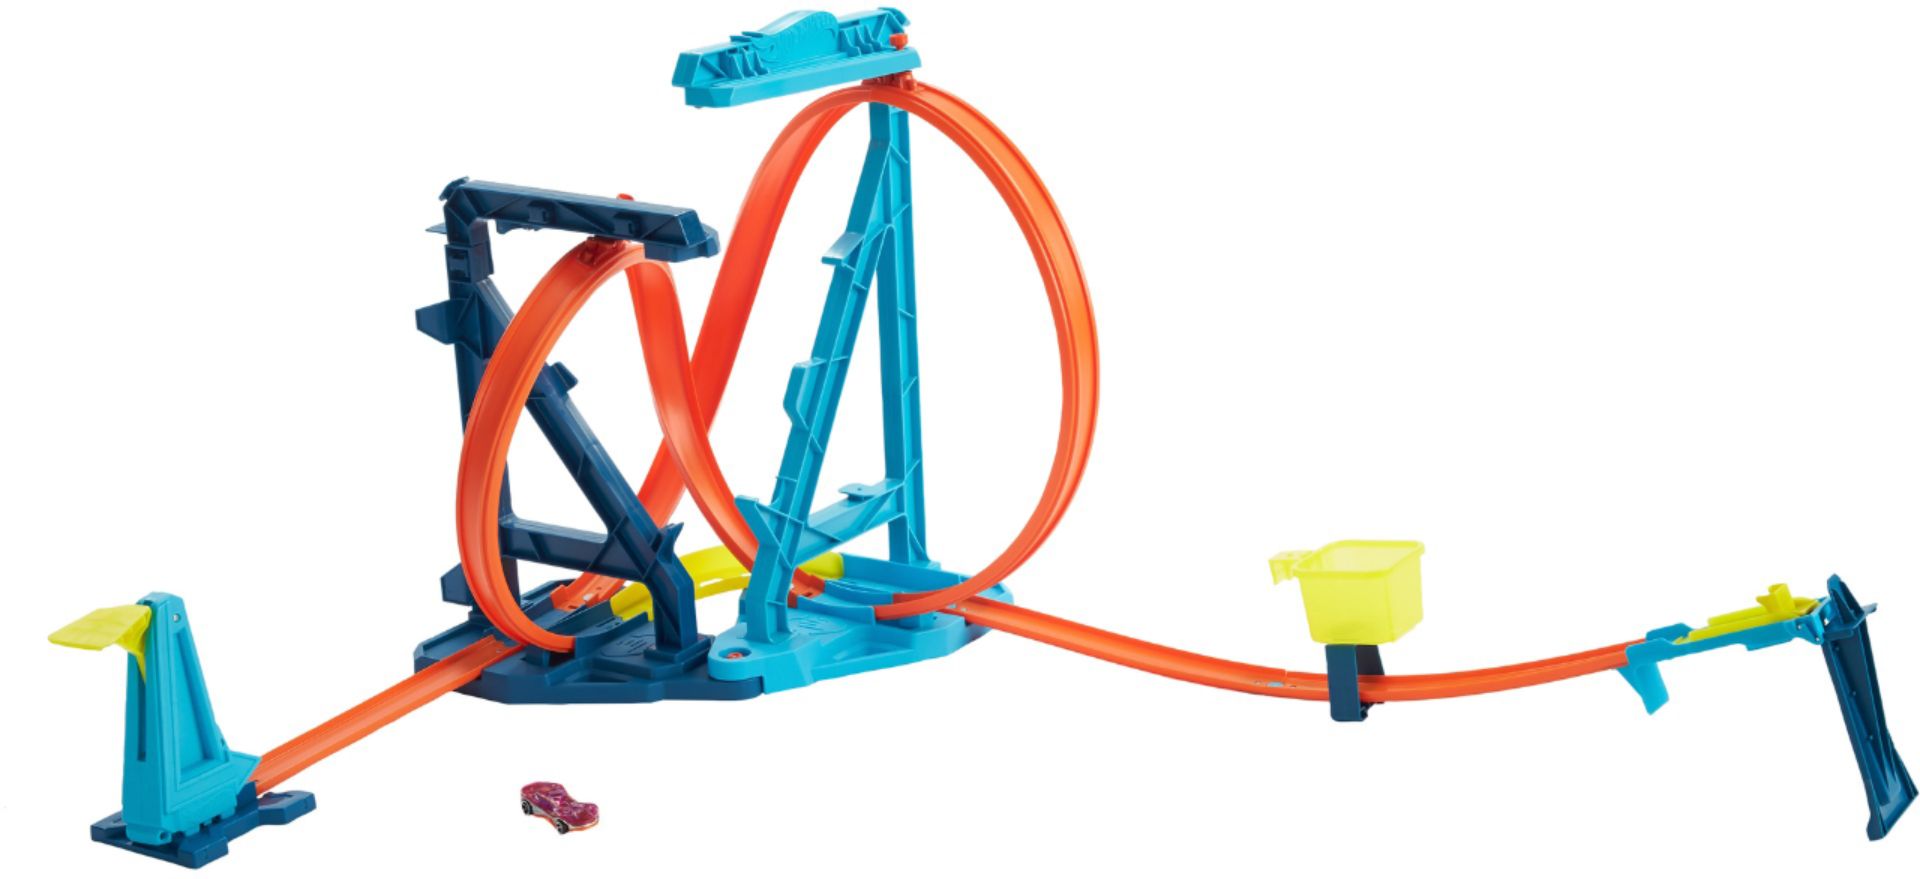 UPC 887961924671 product image for Hot Wheels - Track Builder Unlimited Infinity Loop Kit | upcitemdb.com